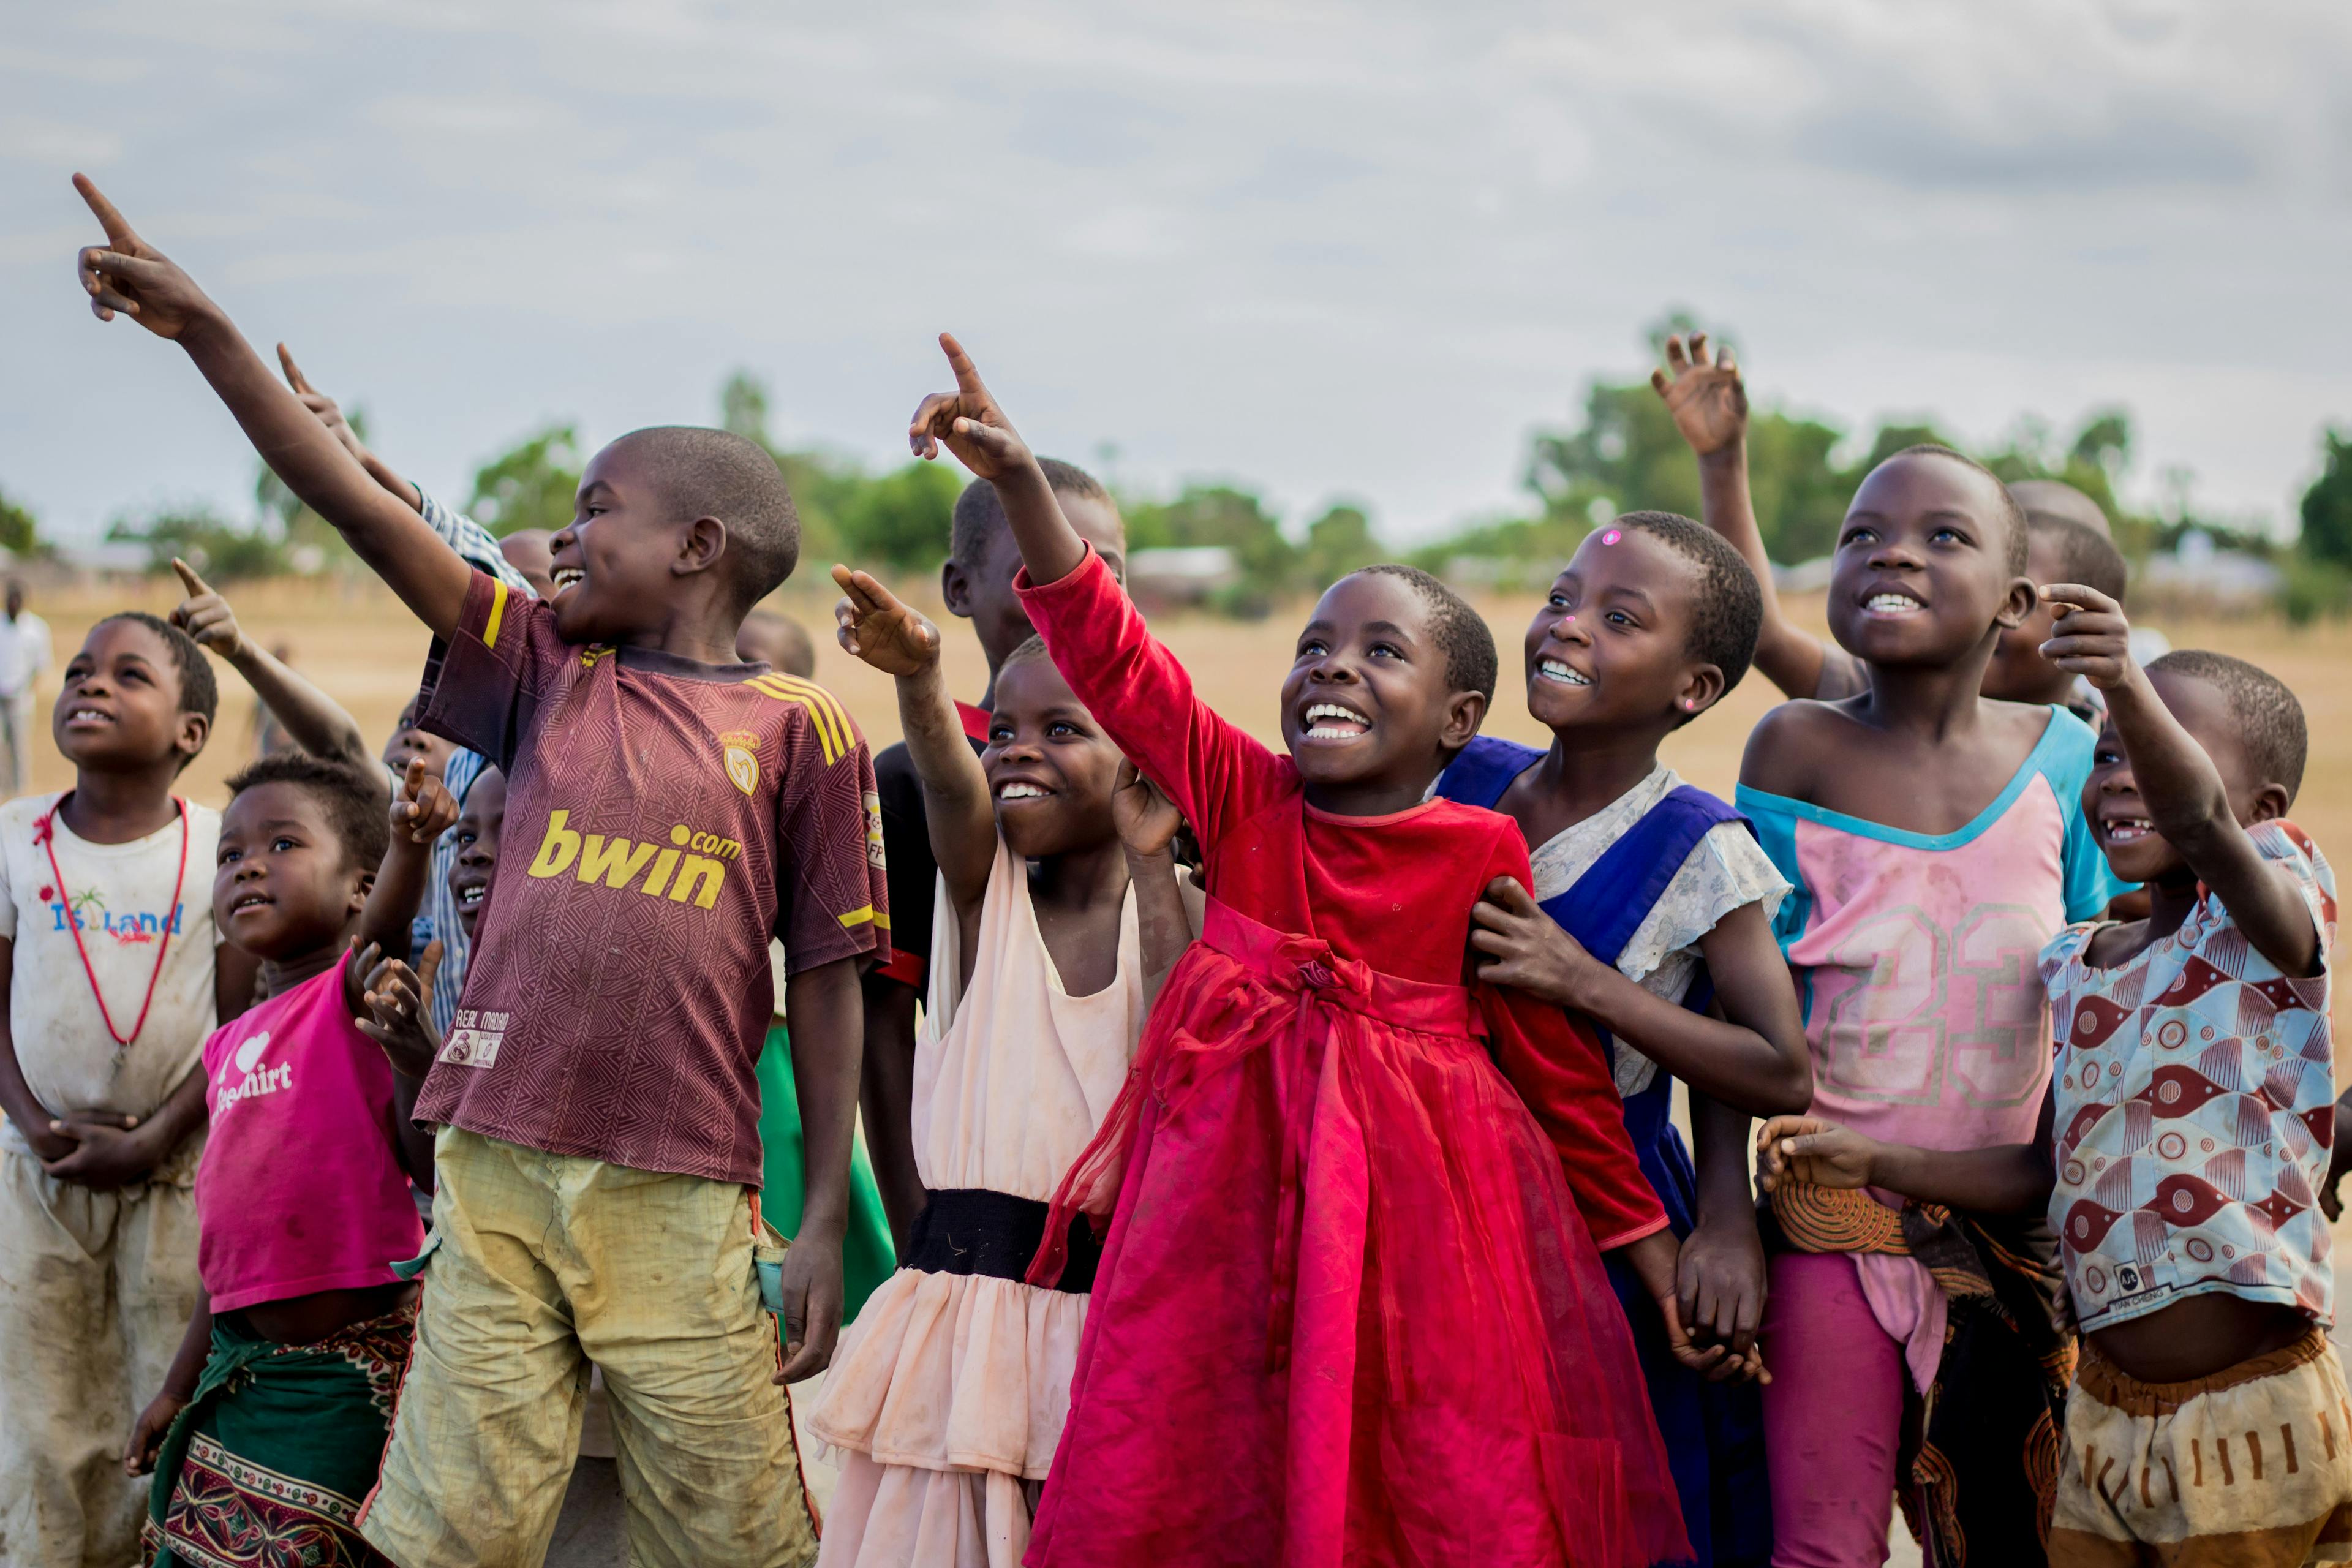 Children look on excited at the testing of unmanned aerial vehicle (UAVs) or drones by the UNICEF Innovation Team at the Kasungu Aerodrome in Kasungu in central Malawi.